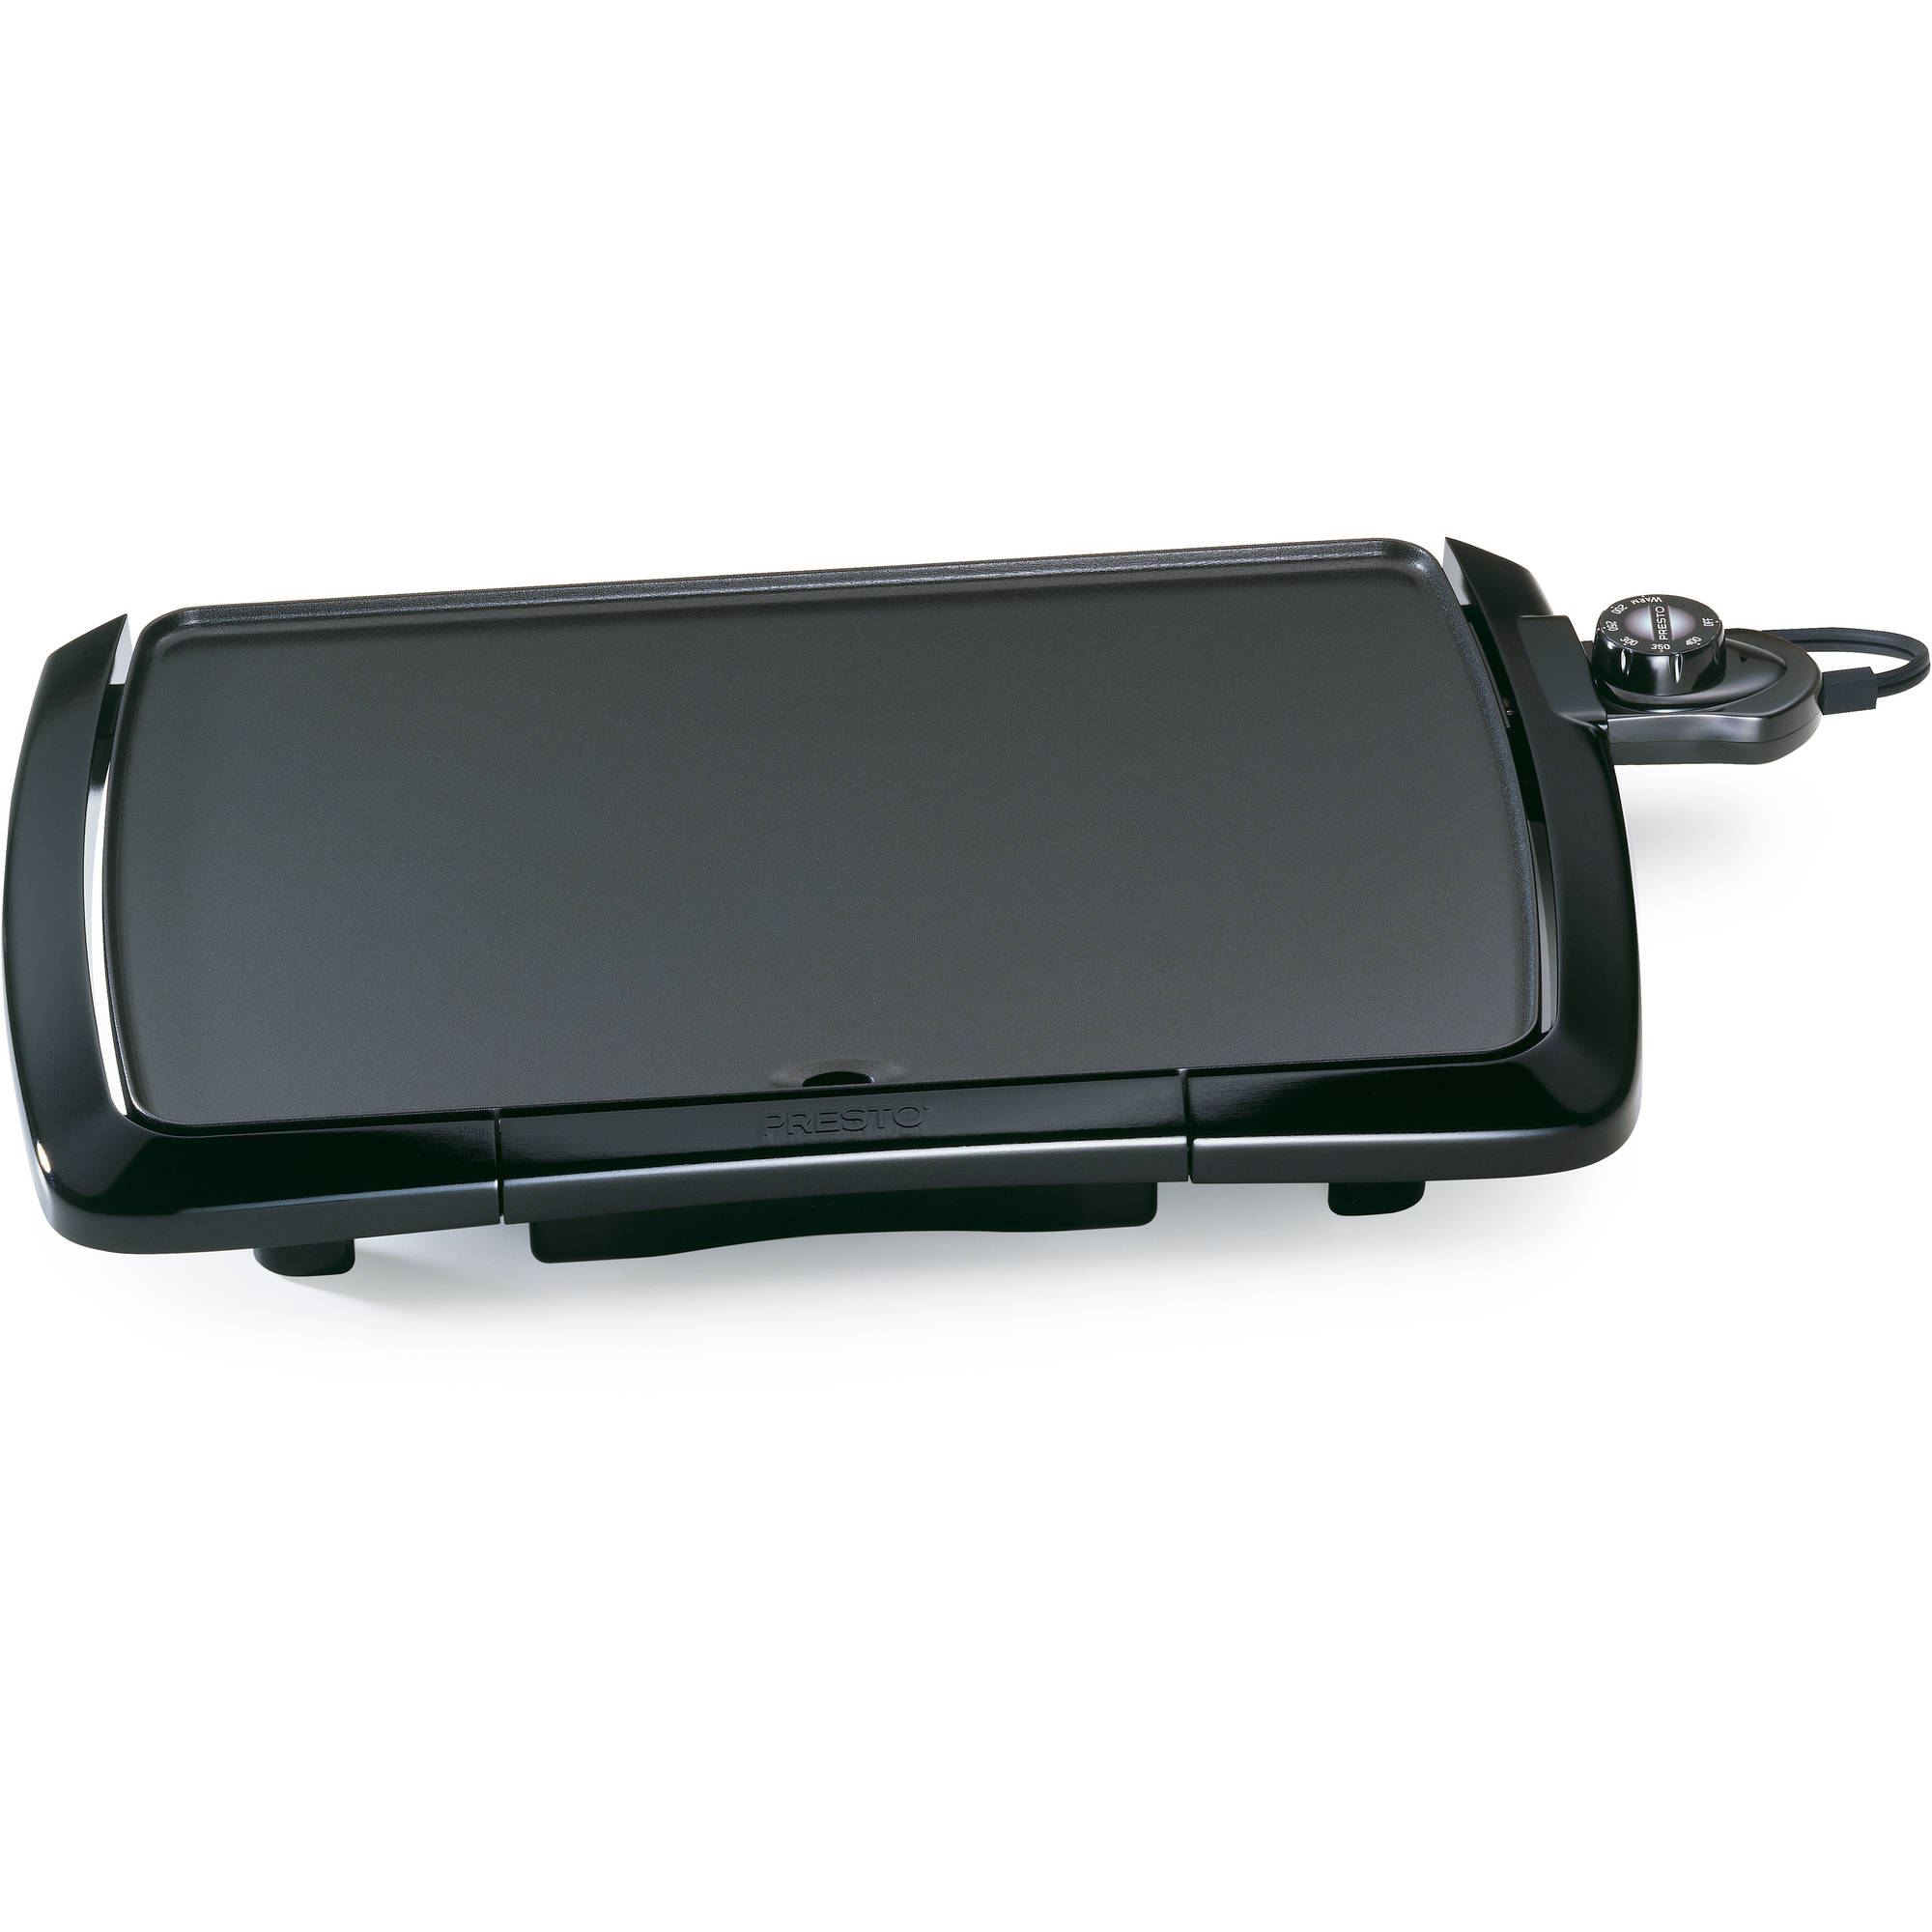 Presto Cool-Touch Electric Griddle 07047 - image 2 of 3